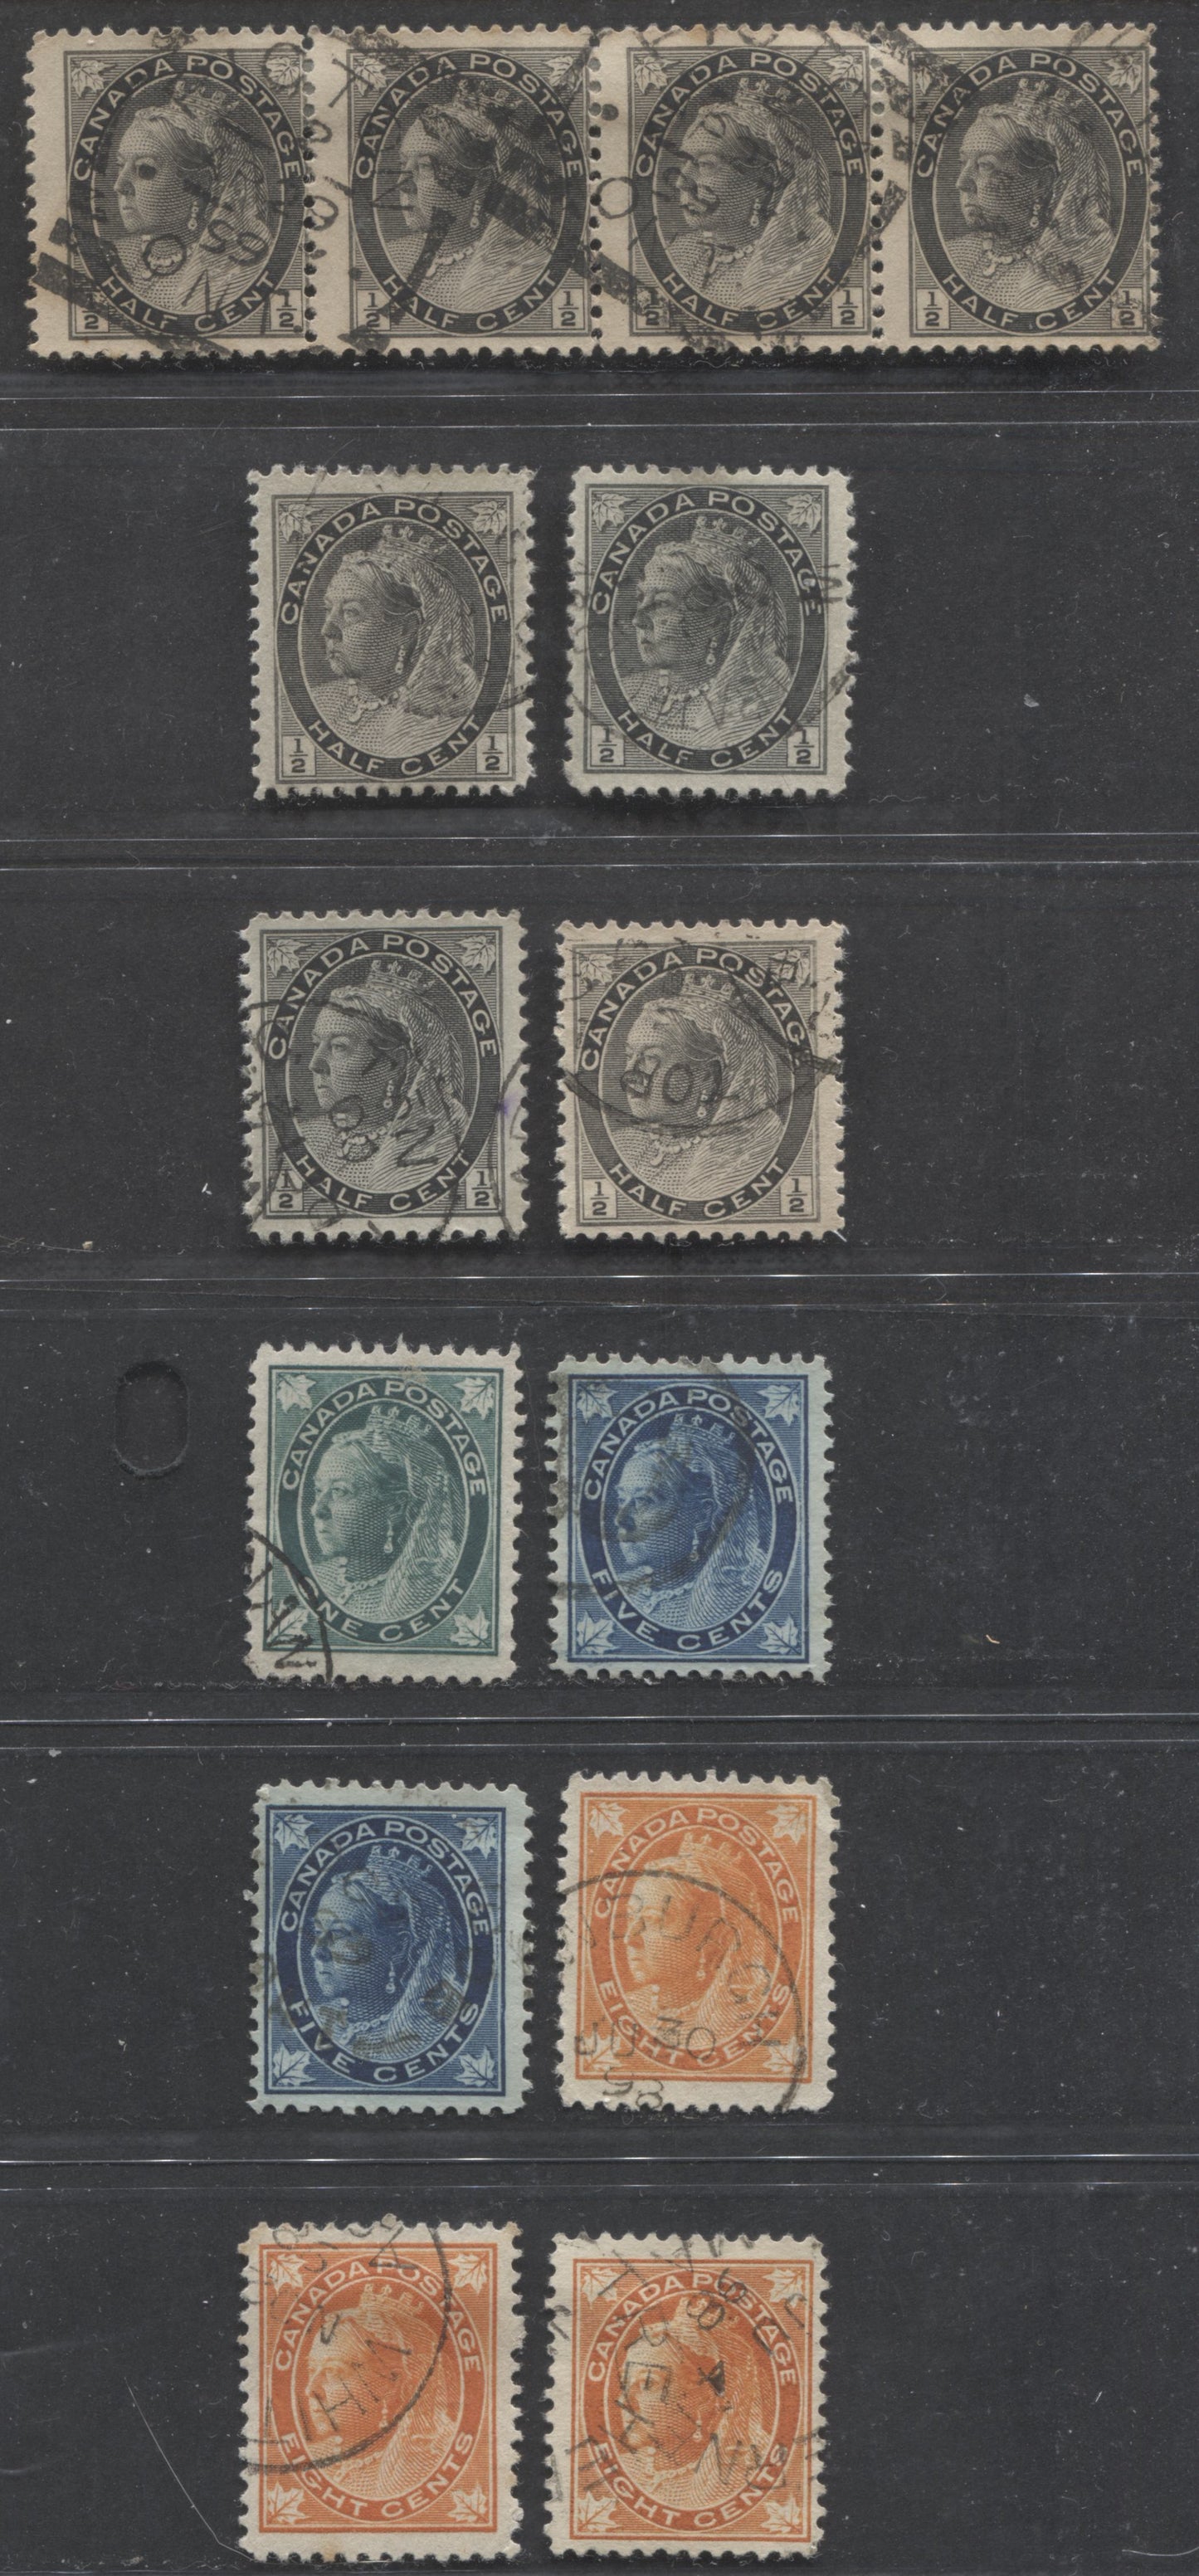 Lot 248 Canada #67, 70, 72ii, 72, 74 1/2c, 1c, 5c, 8c Black - Orange Queen Victoria, 1897-1902 Maple Leaf & Numeral Issues,  Fine & VF Used Singles & Strip of 4, All With Different Papers or Shades